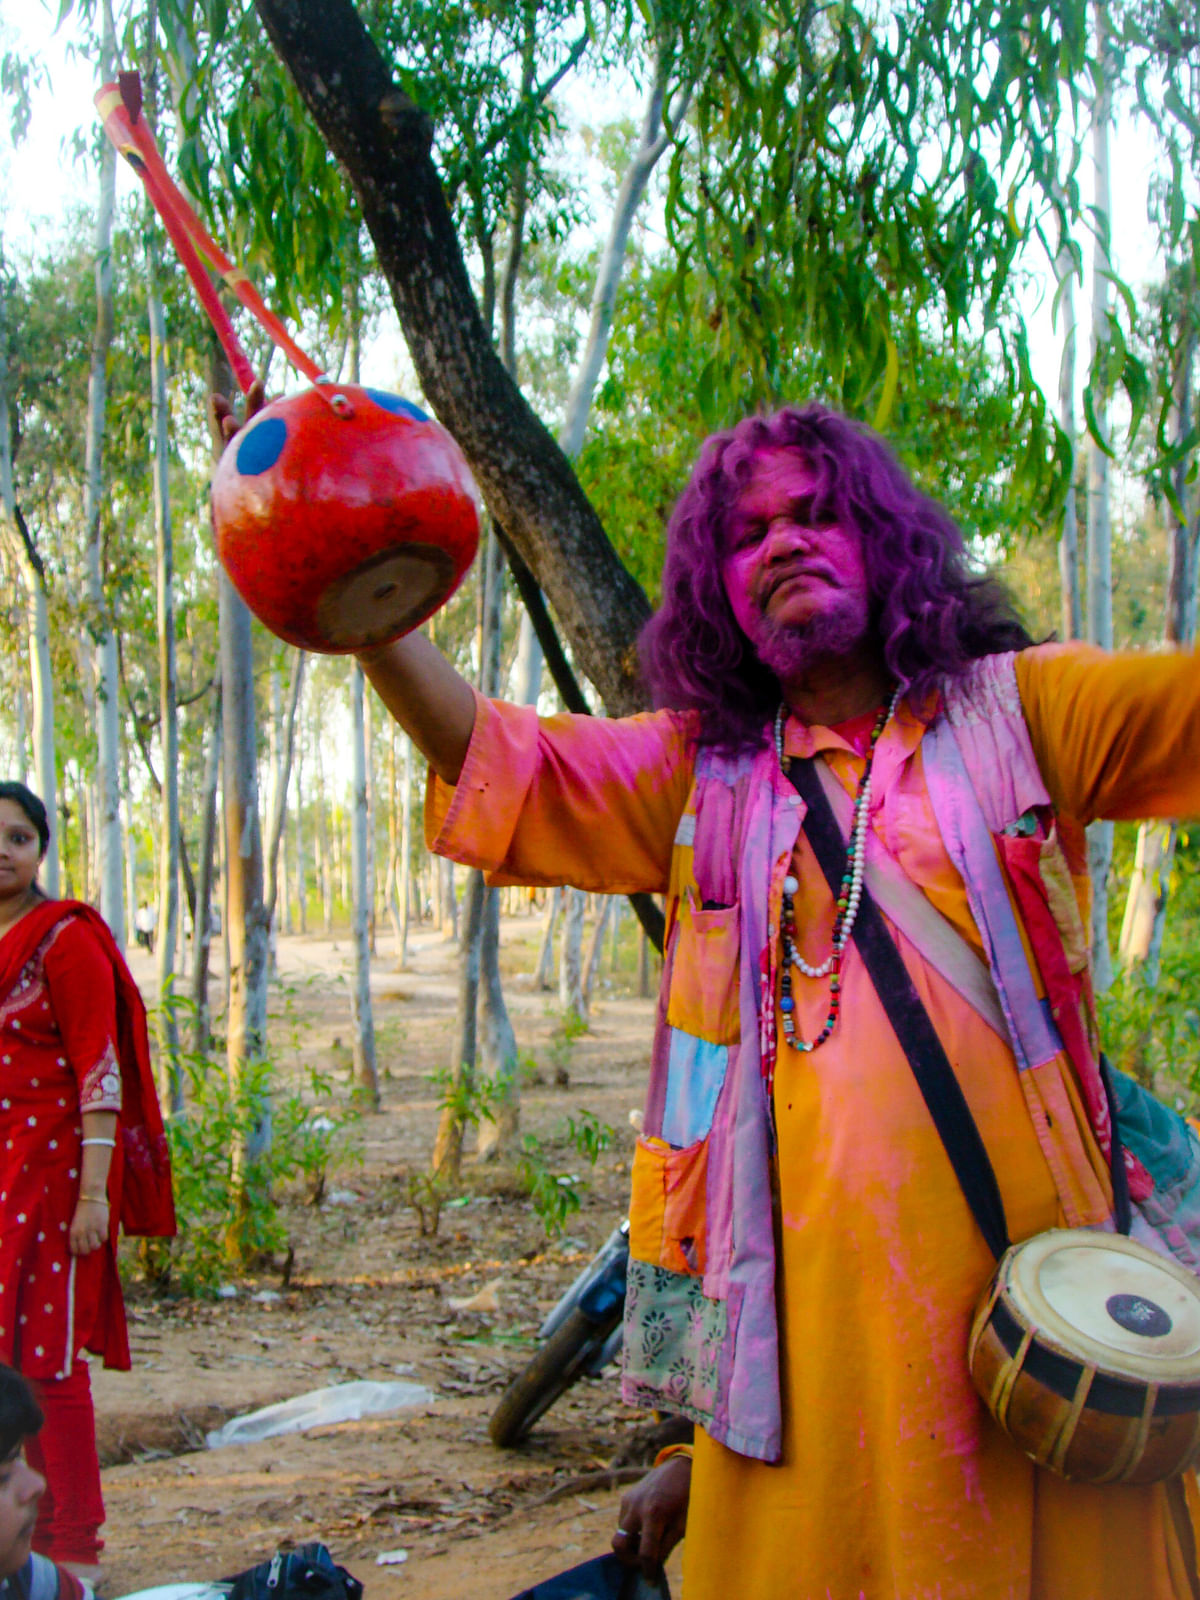 The saffron-clad Bauls—the mystical fakirs of Bengal keep the spirit alive as they sing thought-provoking songs on their “ektara”. Photo credit: Ayandrali Dutta